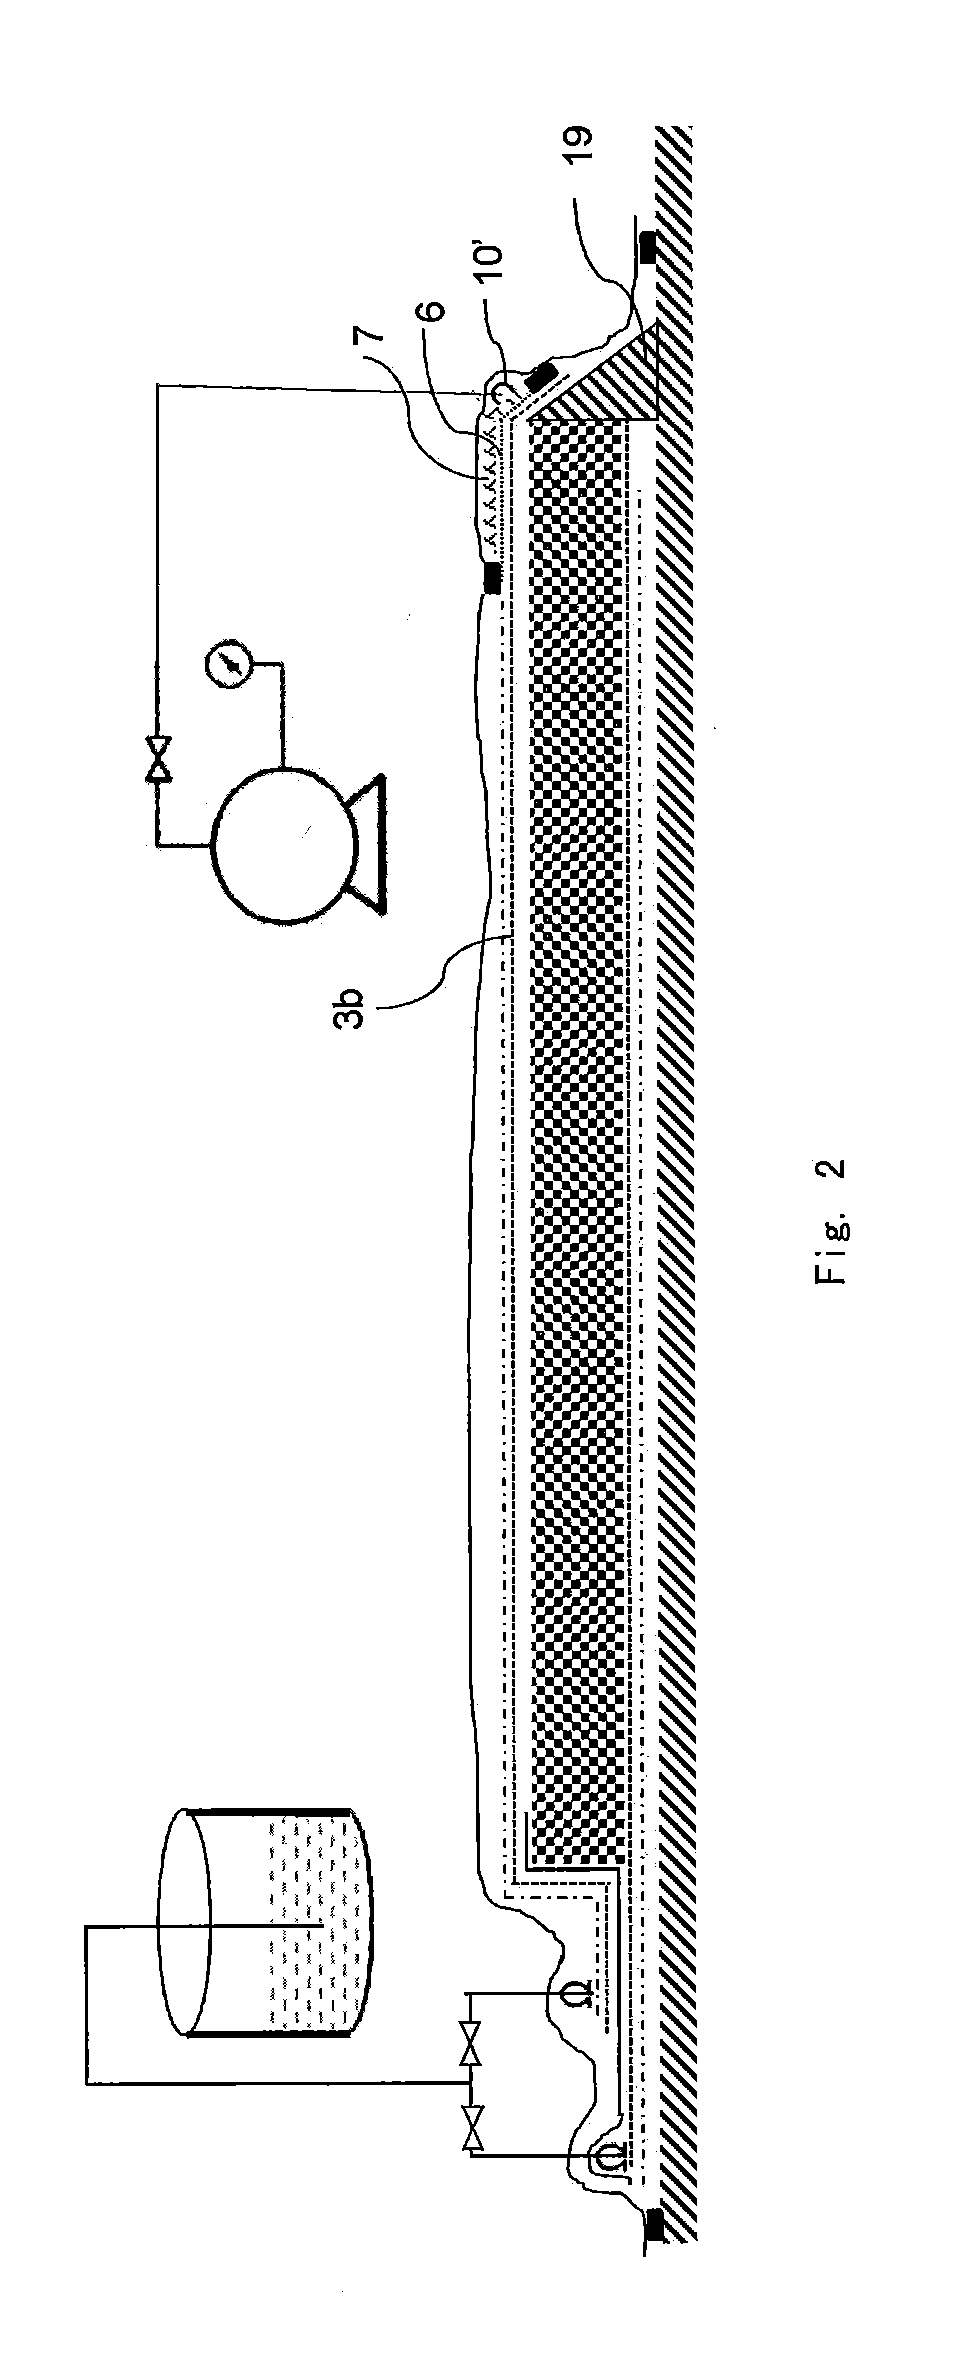 Method for manufacturing fiber-reinforced plastic products